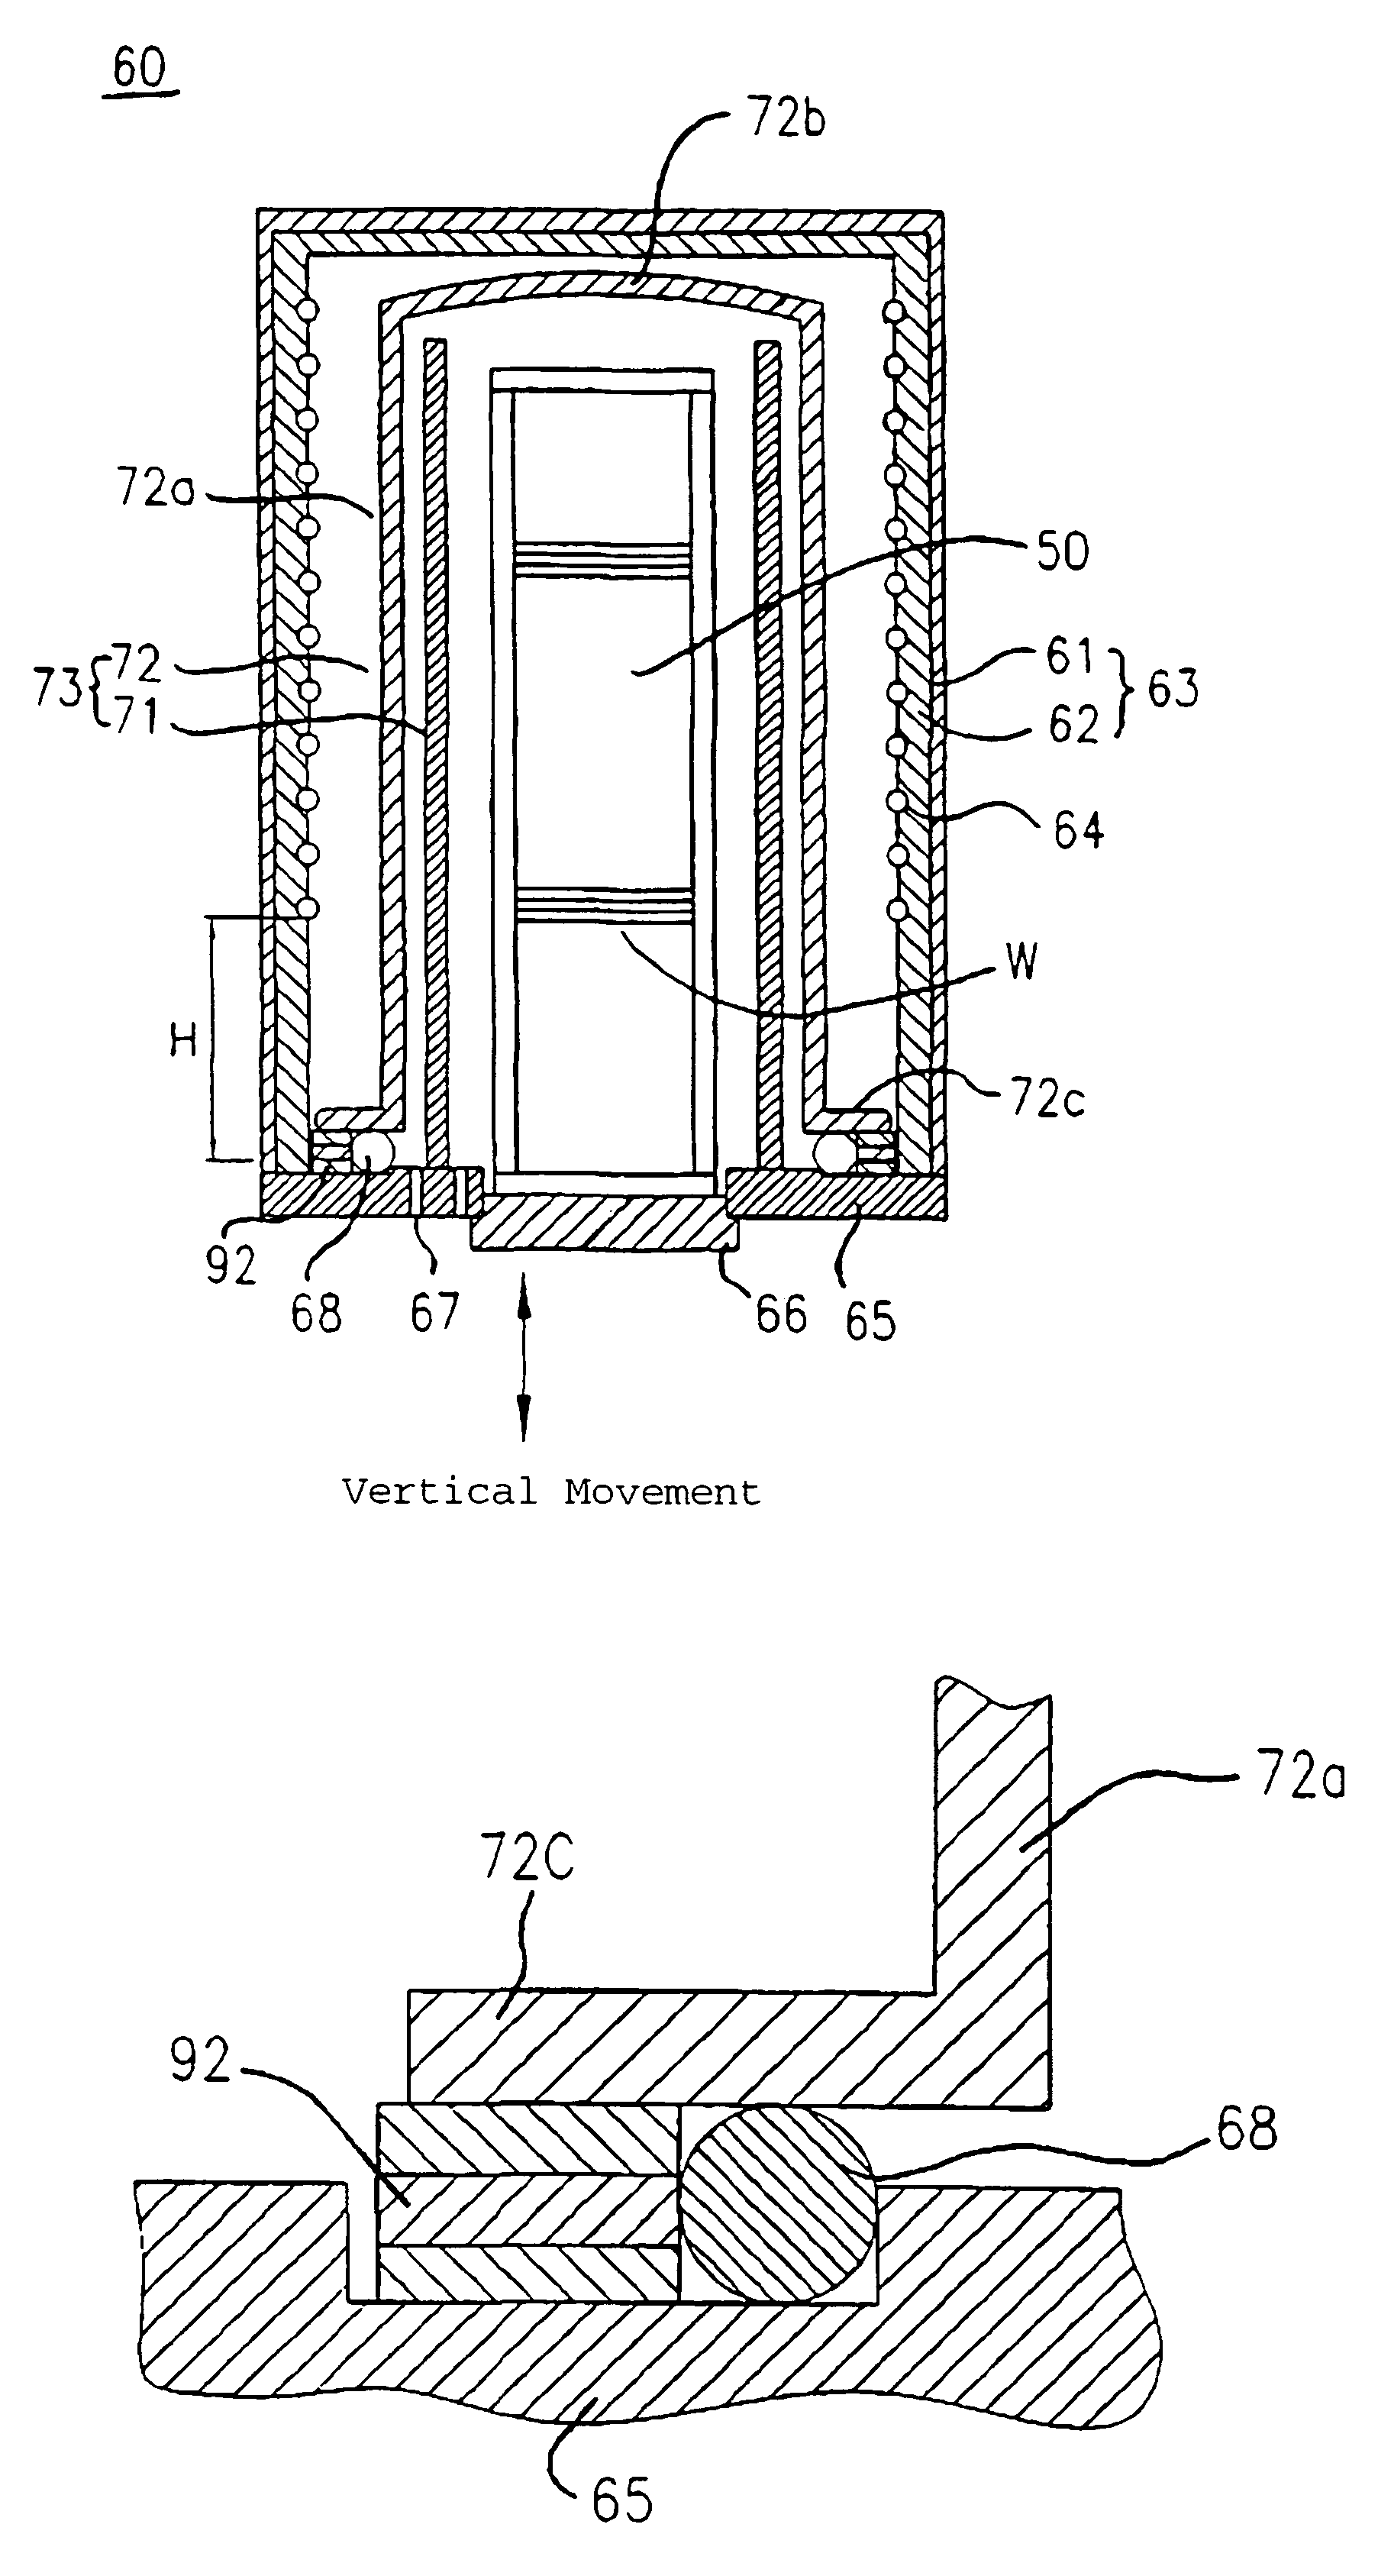 Thermal treatment system for semiconductors